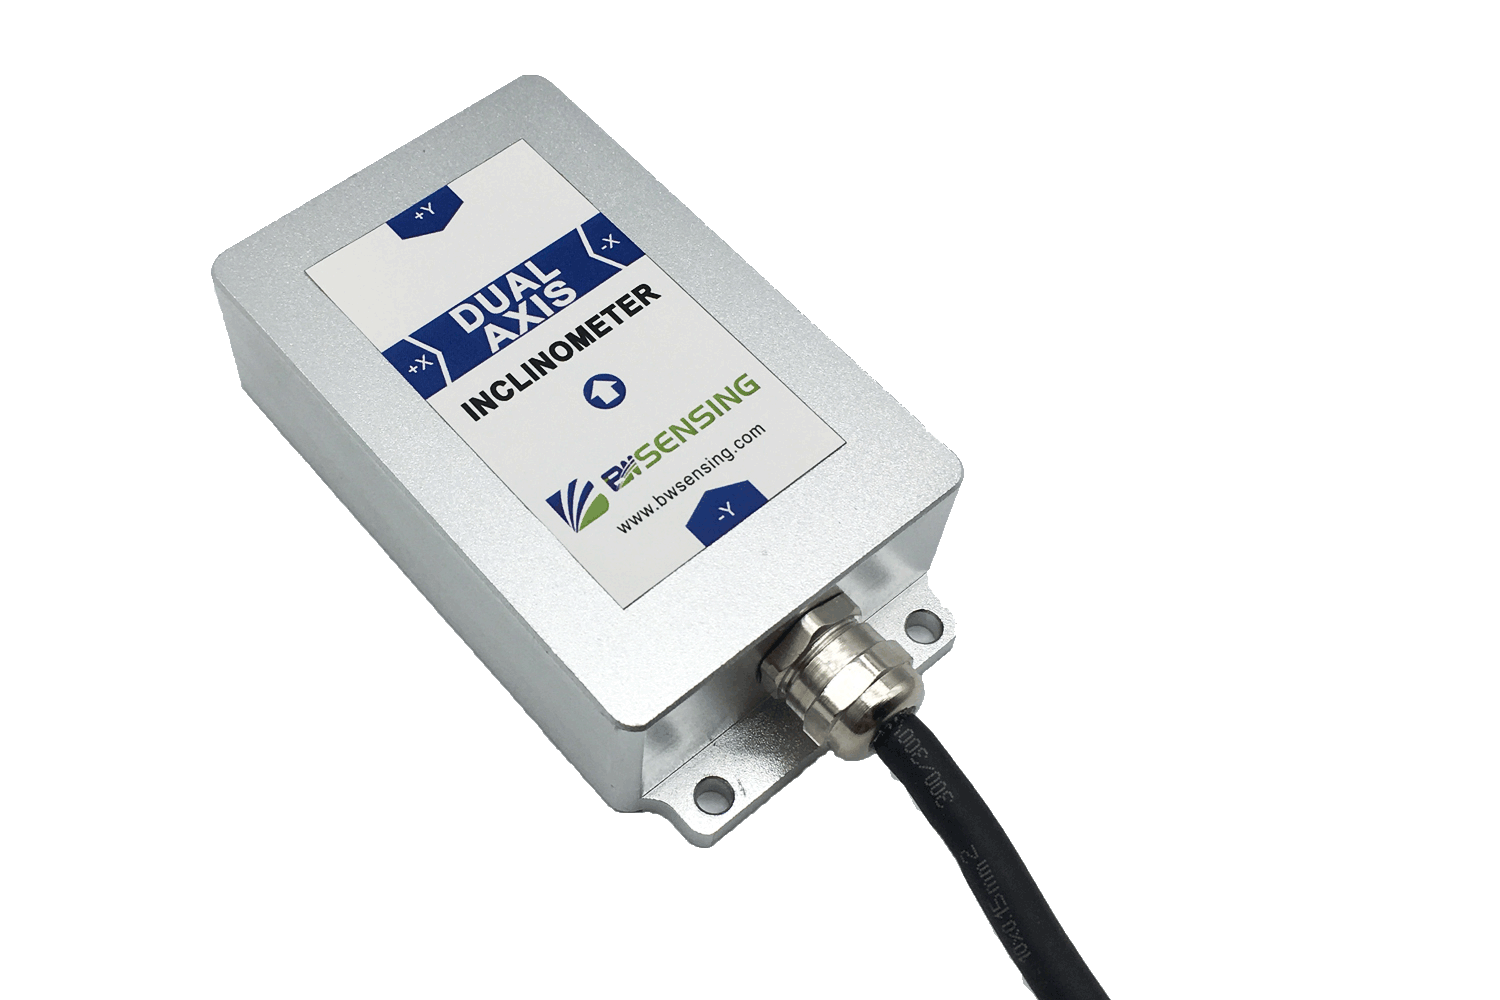 BWSENSIGN Super High-accuracy Voltage Output Dual-axis Inclinometer BWS2200